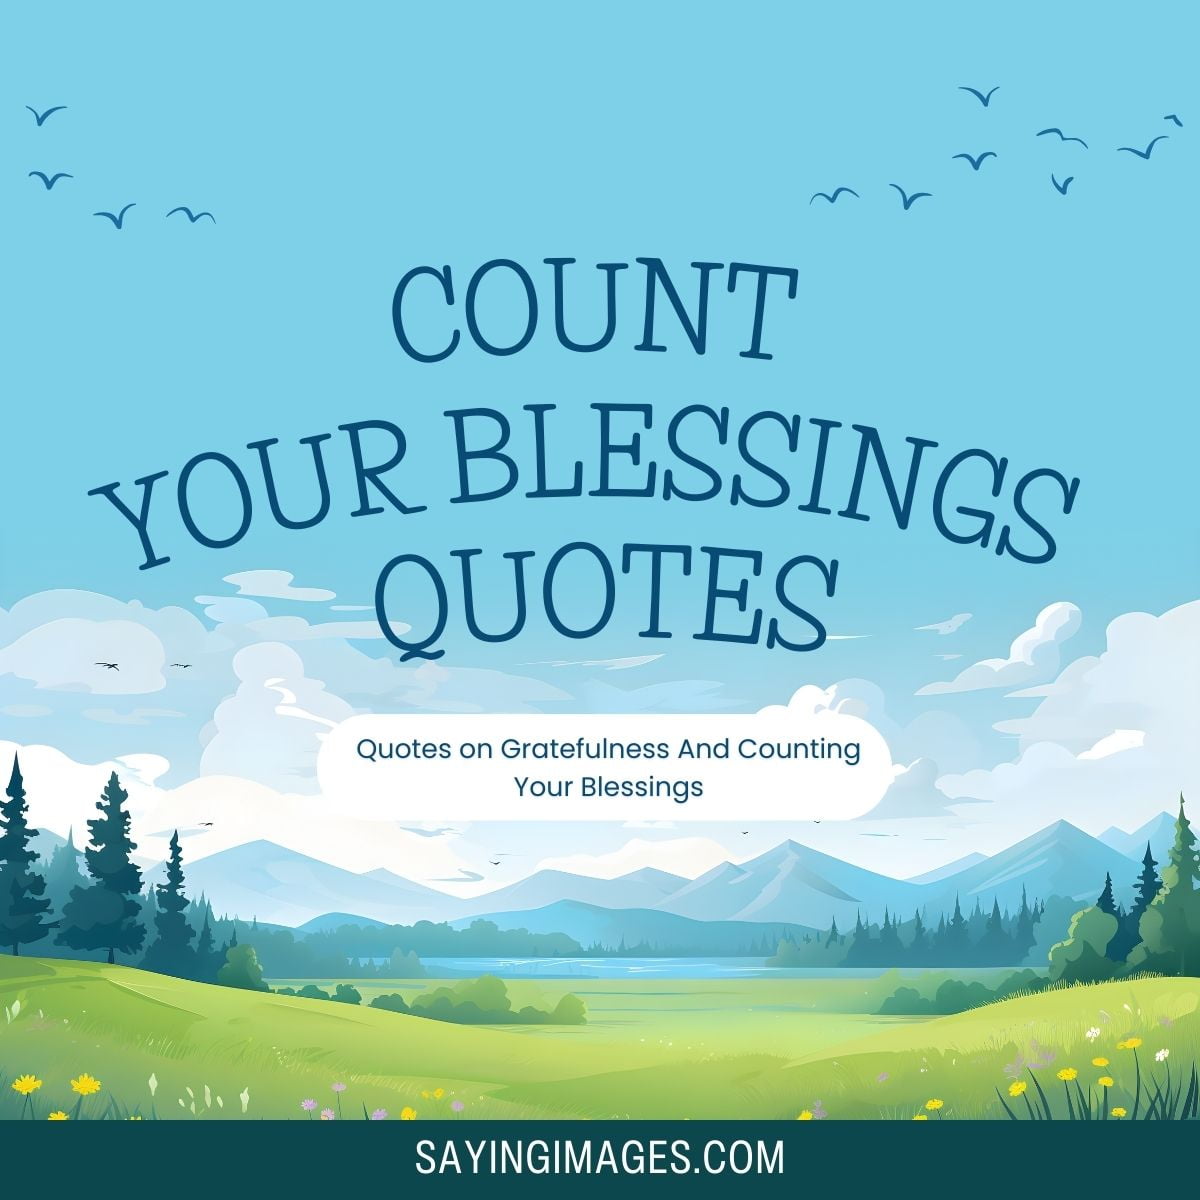 Quotes on Gratefulness And Counting Your Blessings